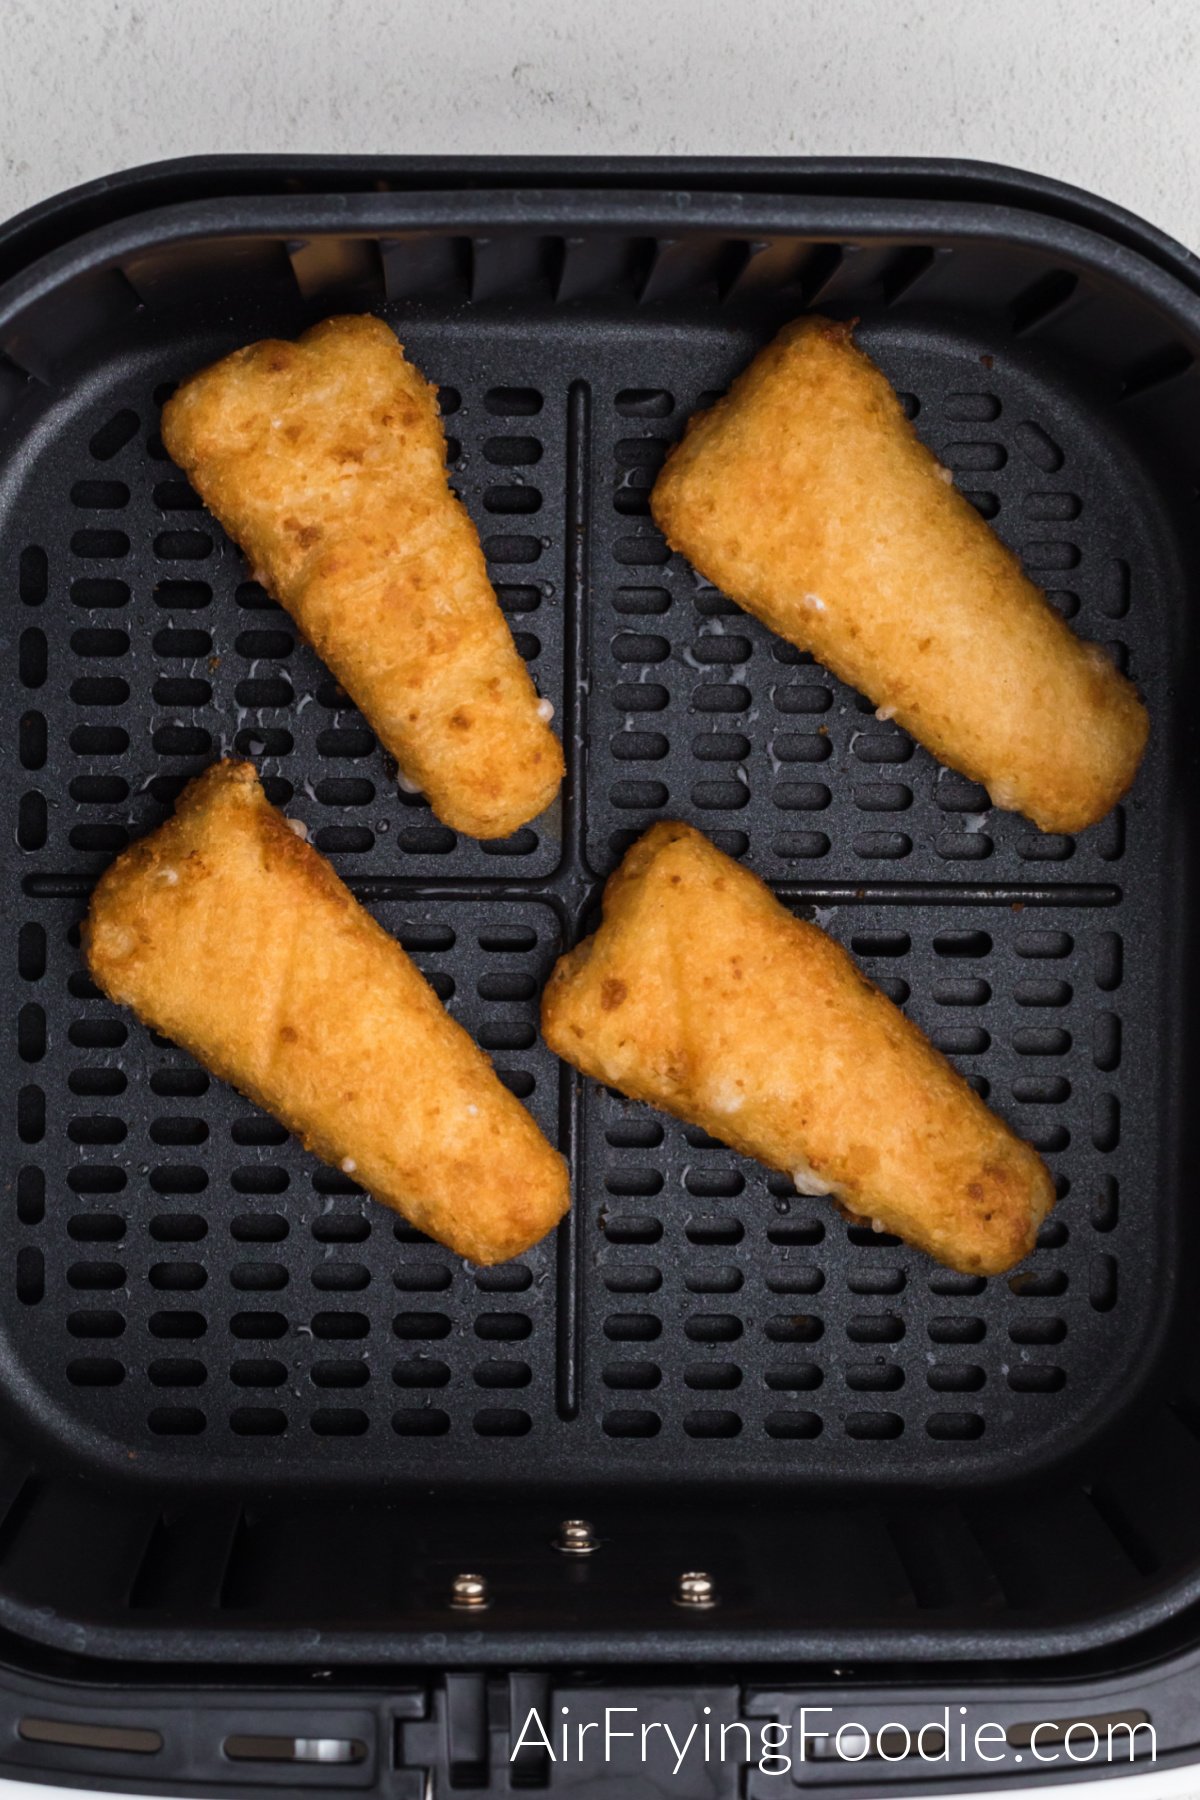 Fully cooked fish fillets in the basket of the air fryer.